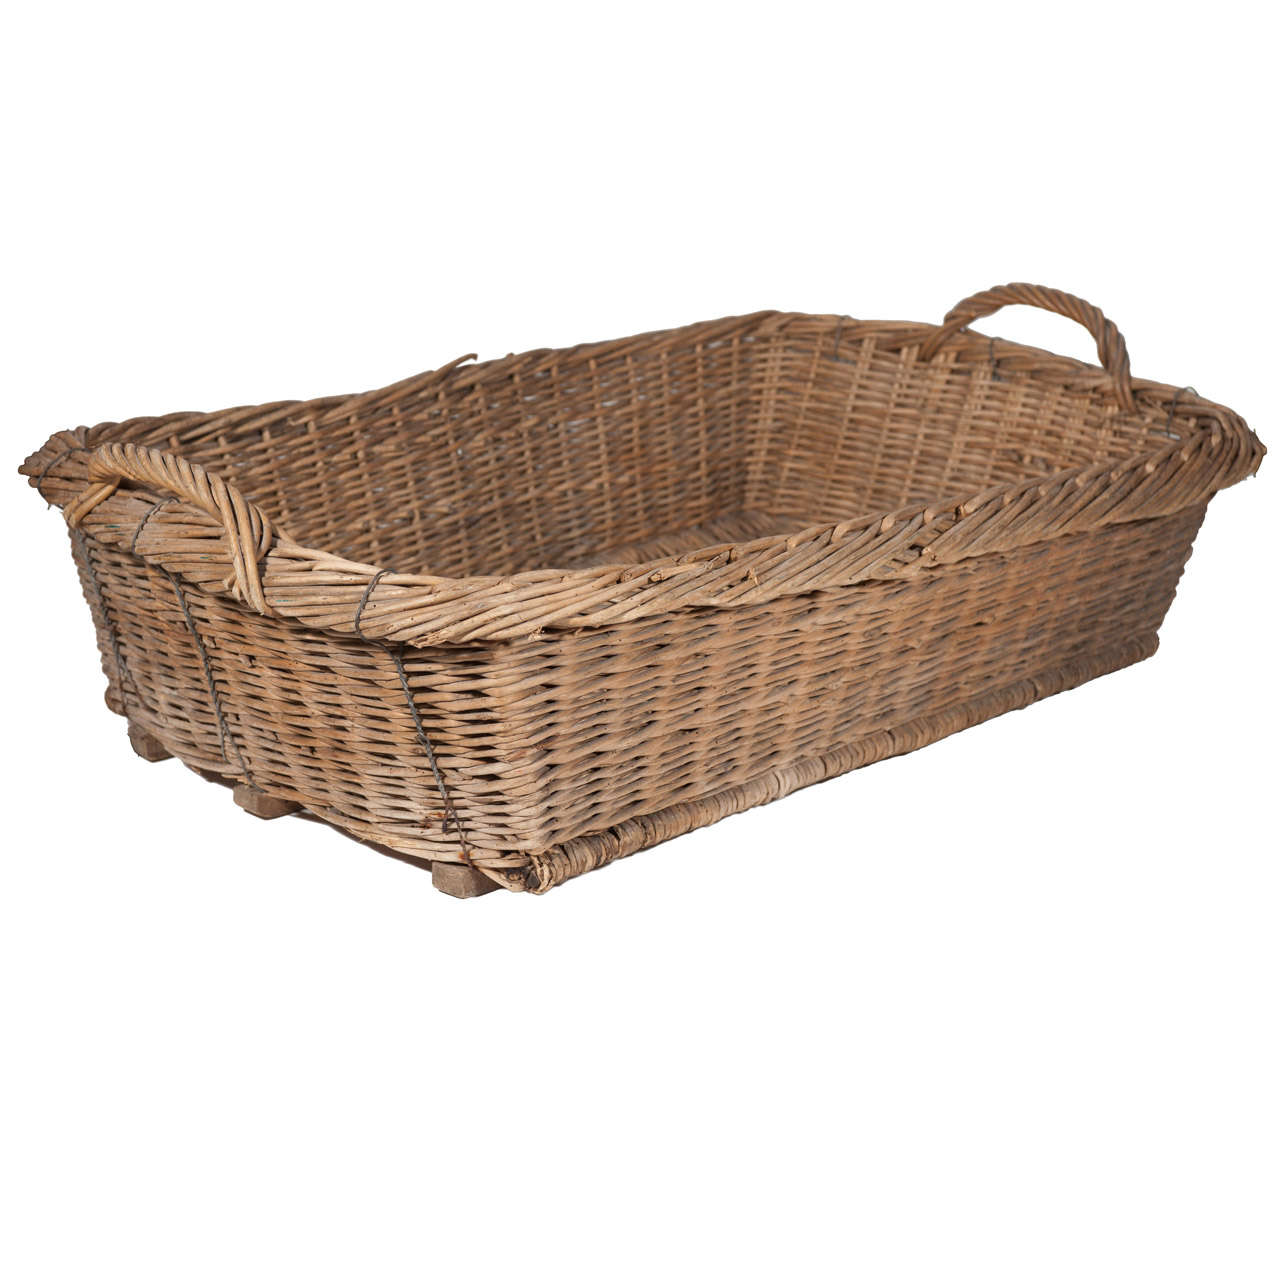 19th Century Antique Large Wicker Basket with Wooden Foot Strapping